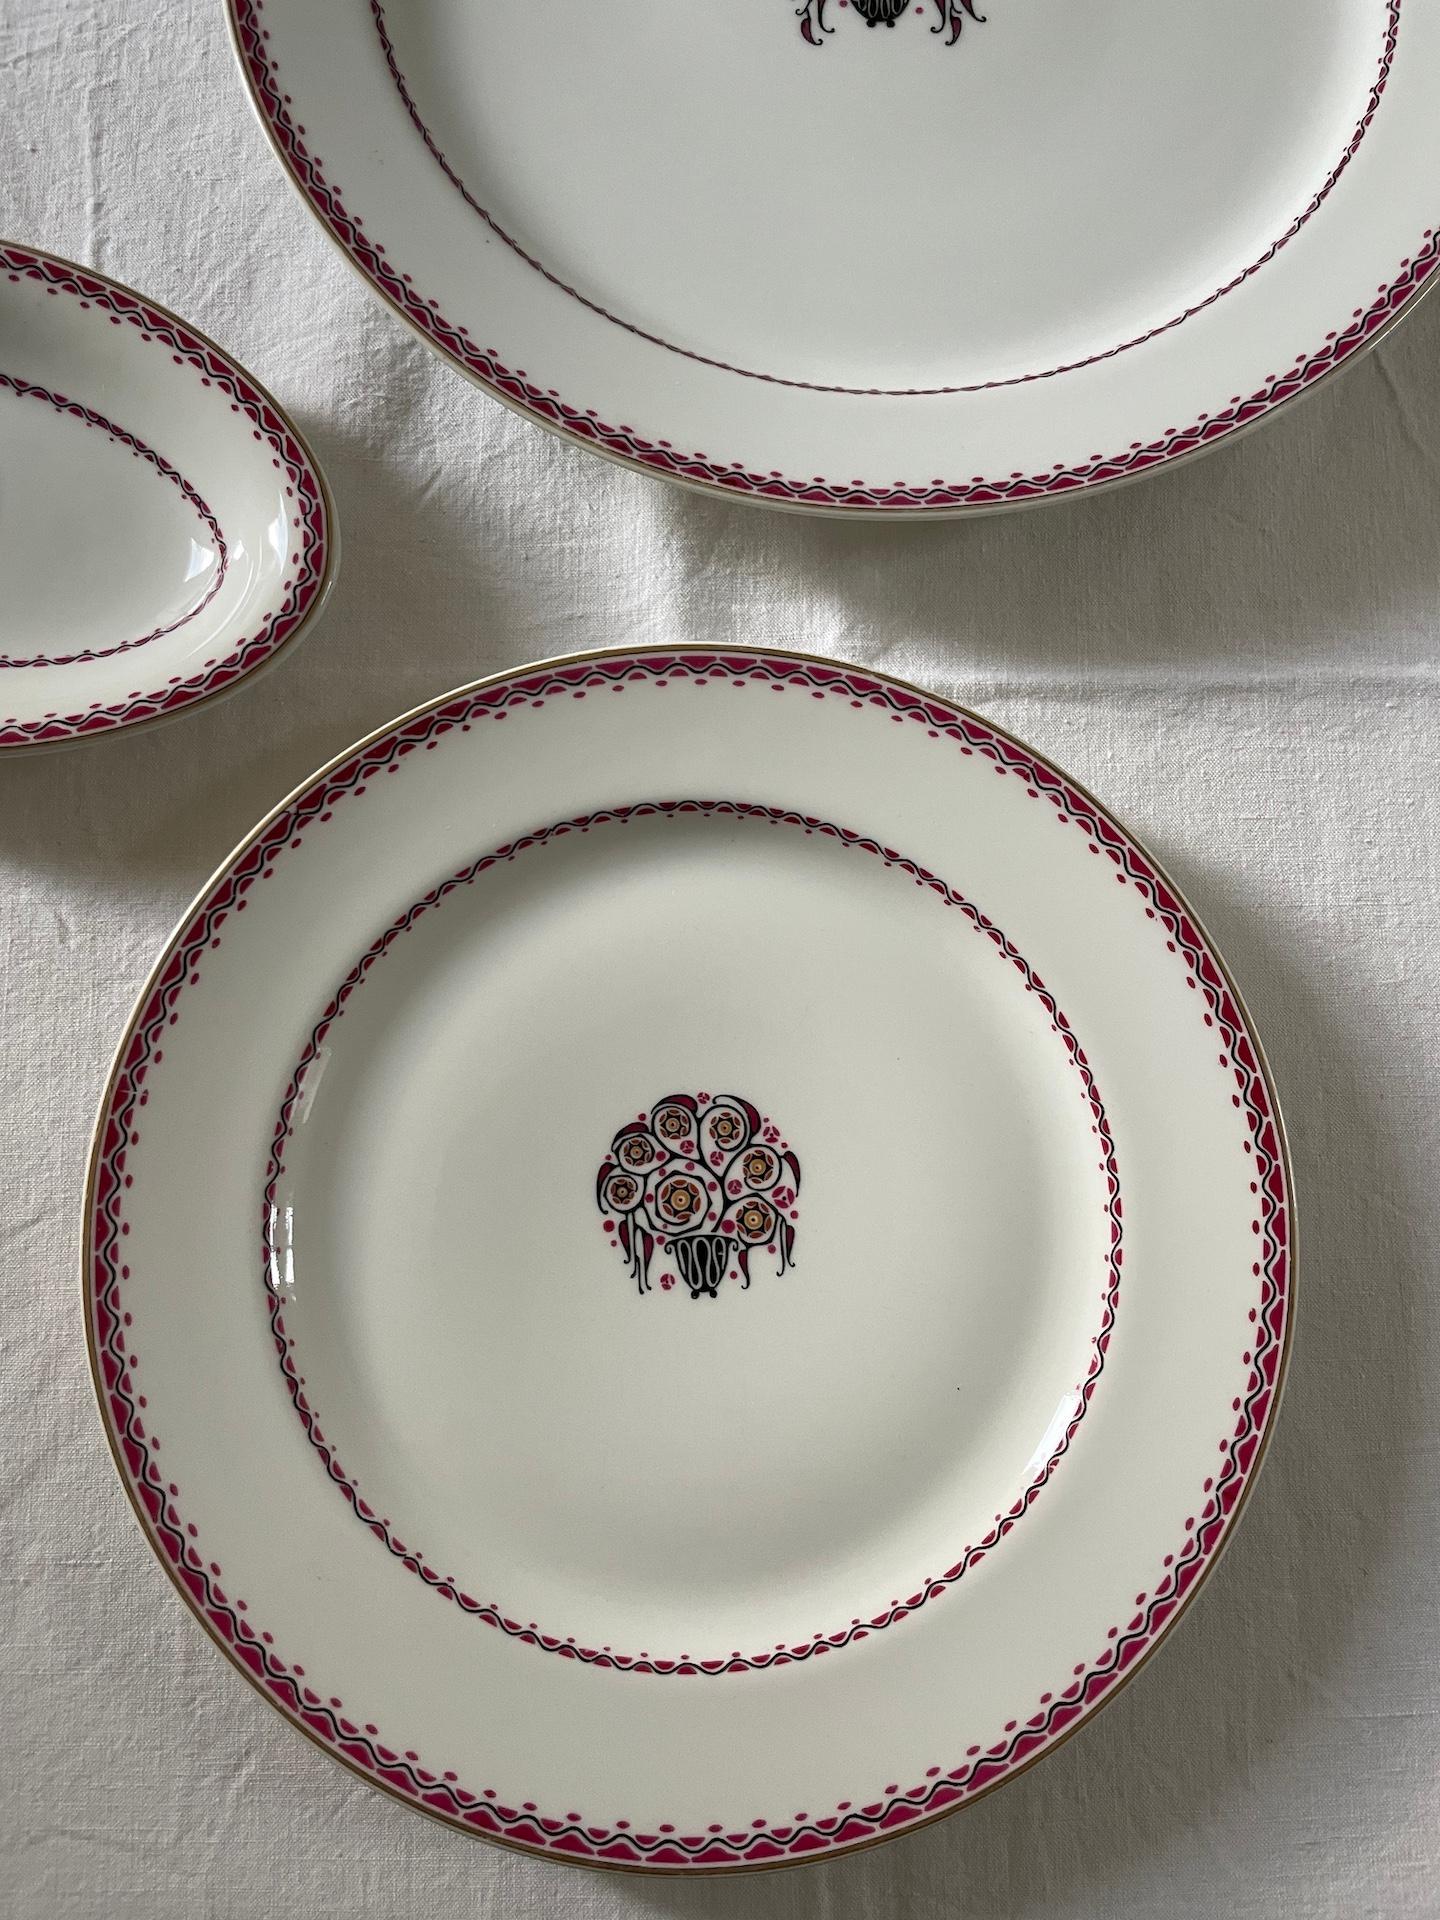 Early 20th Century Art Deco Dinner Service by Haviland Limoges, Circa 1925